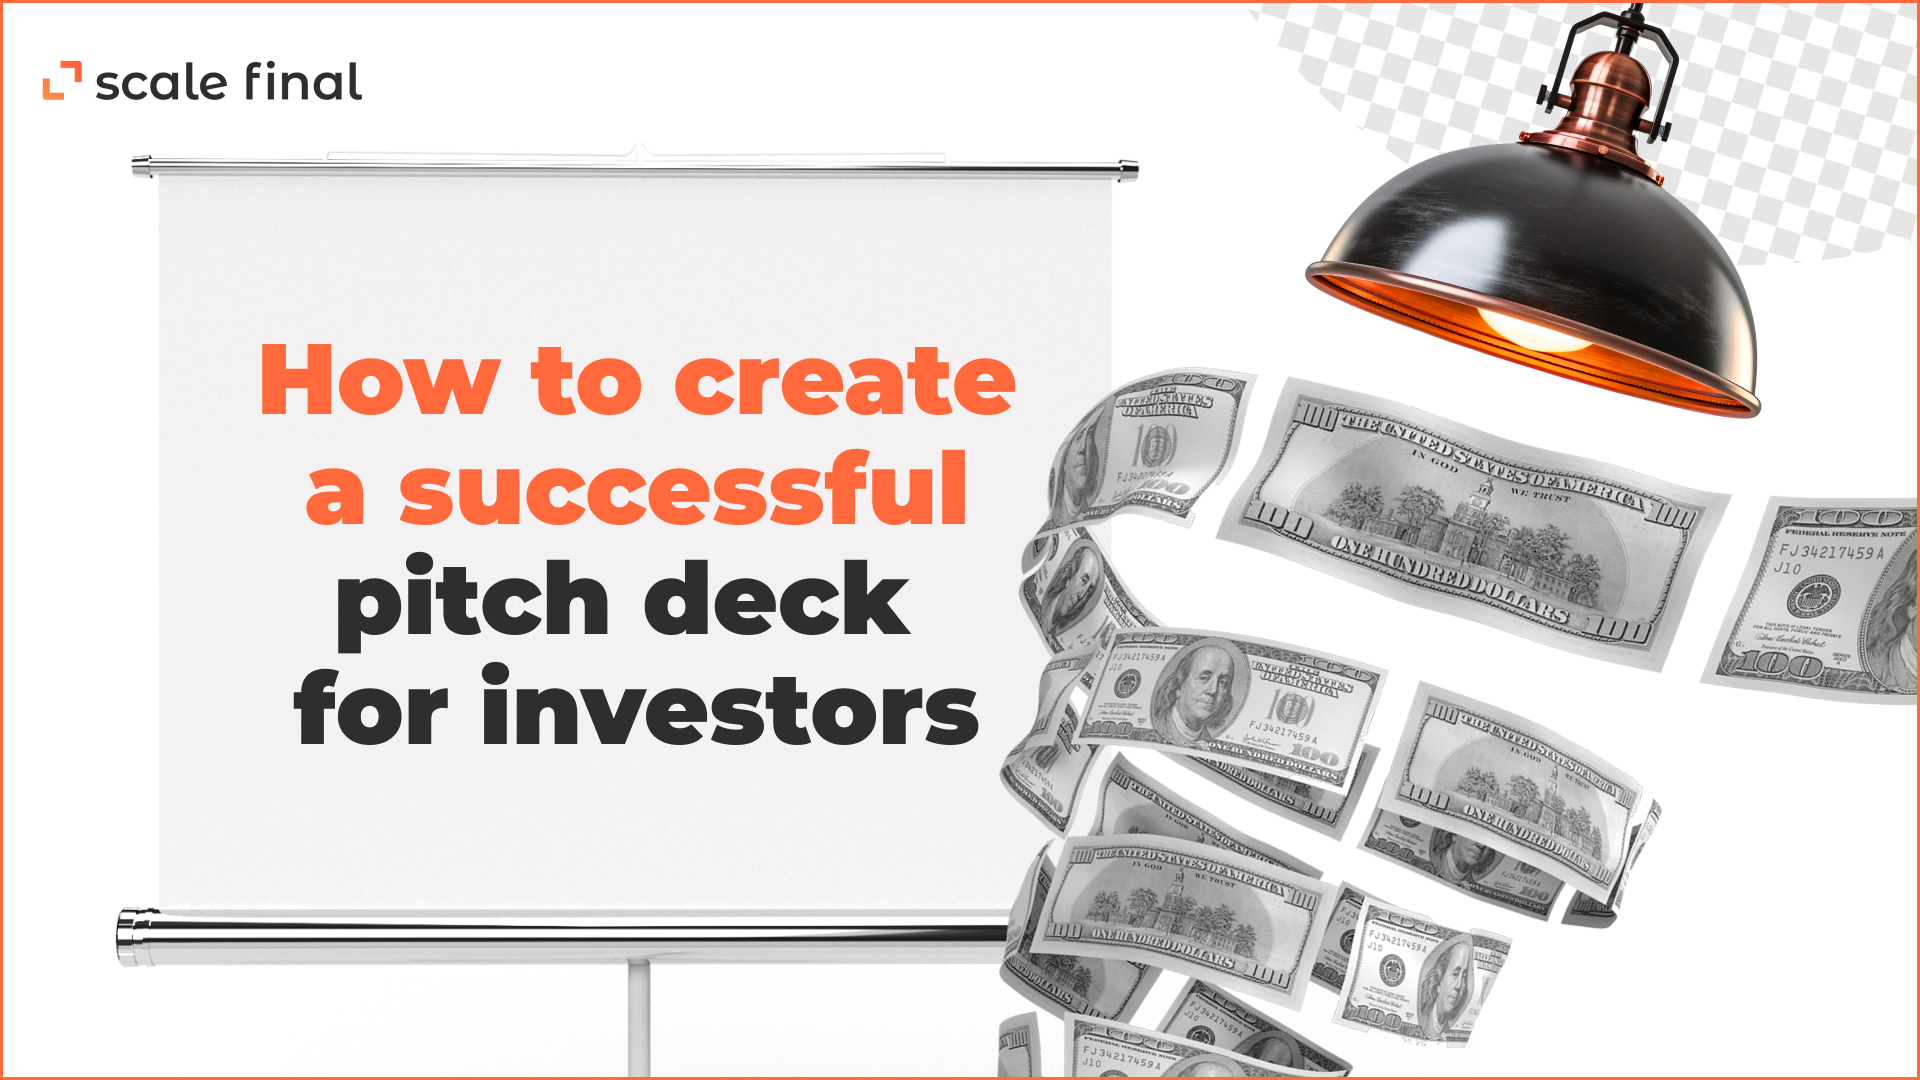 How to create a successful pitch deck for investors